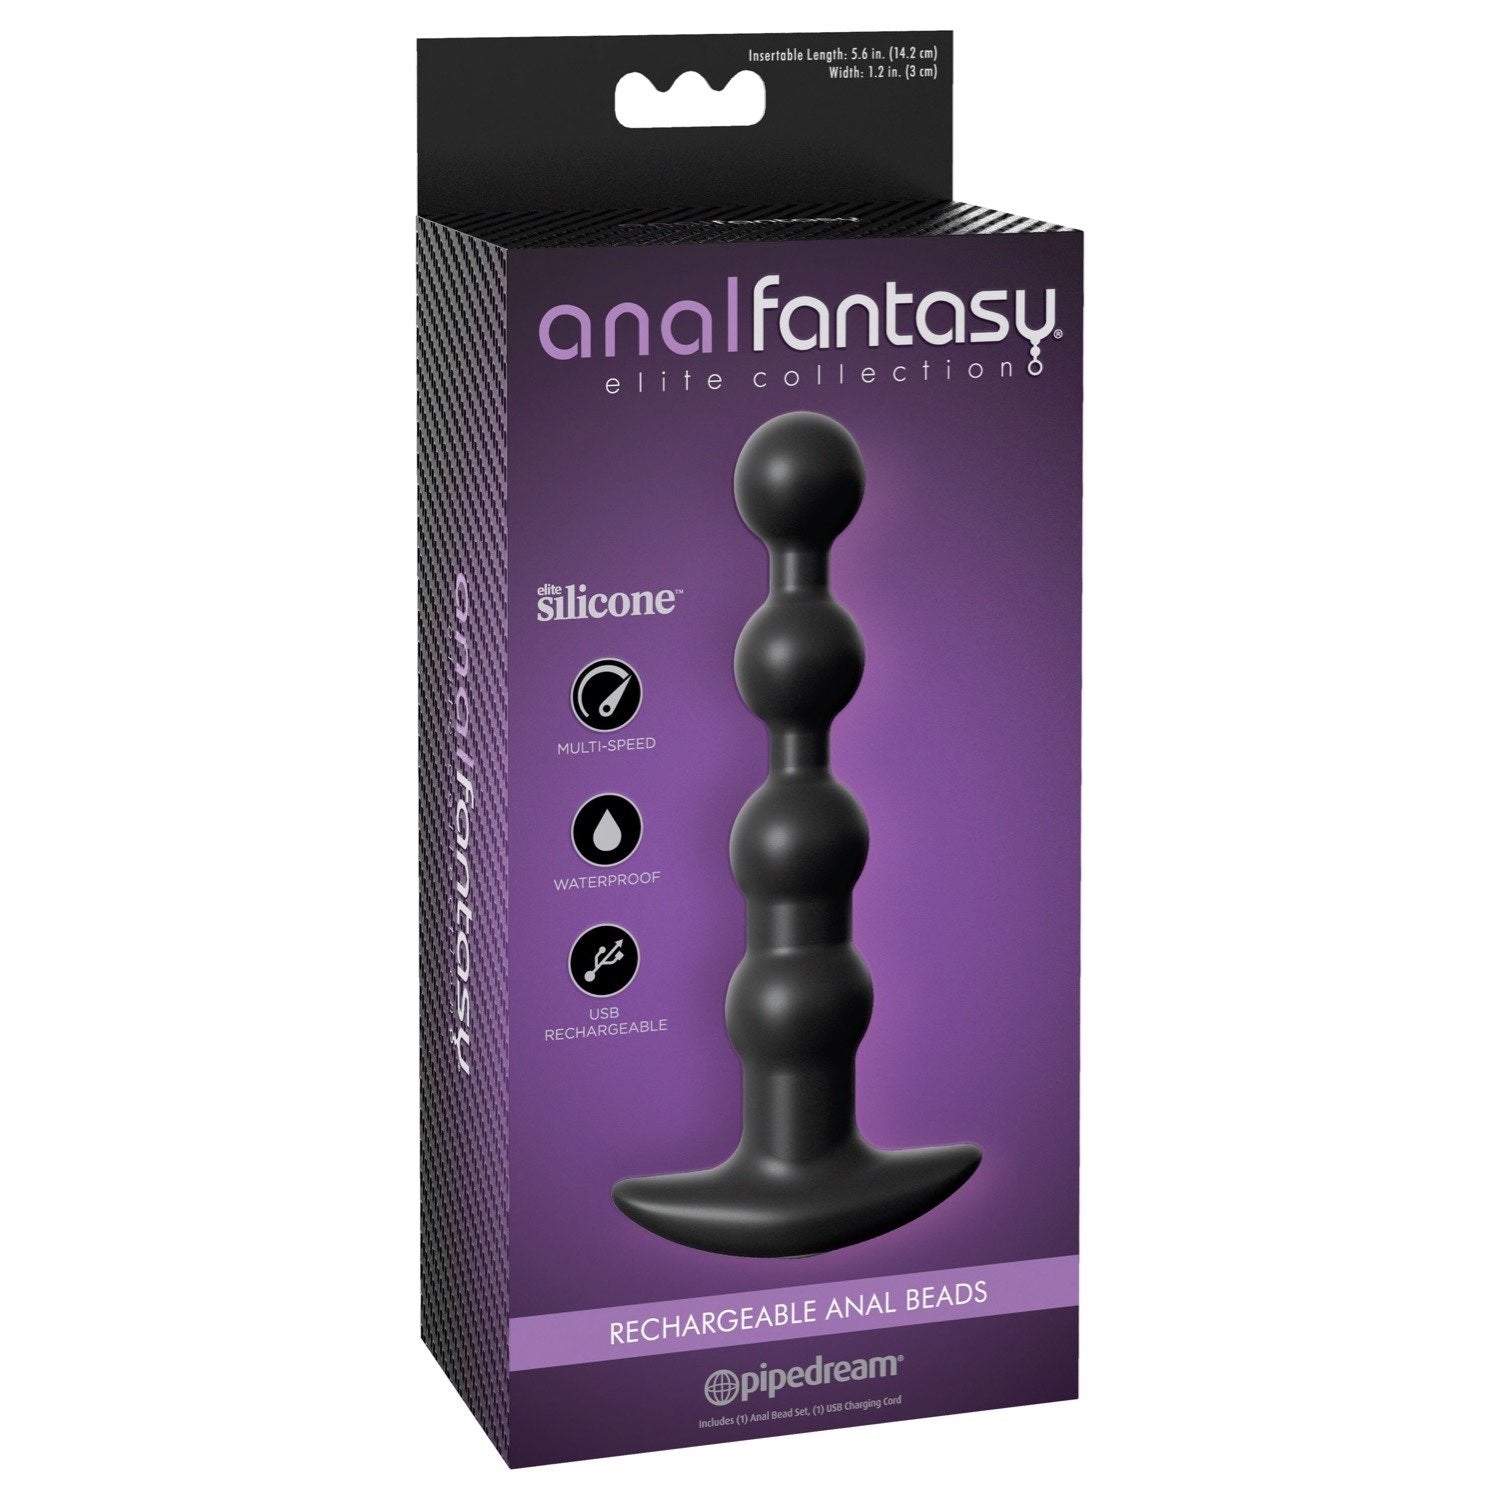 Anal Fantasy Elite Collection Rechargeable Anal Beads - Black 17 cm USB Rechargeable Vibrating Anal Beads by Pipedream